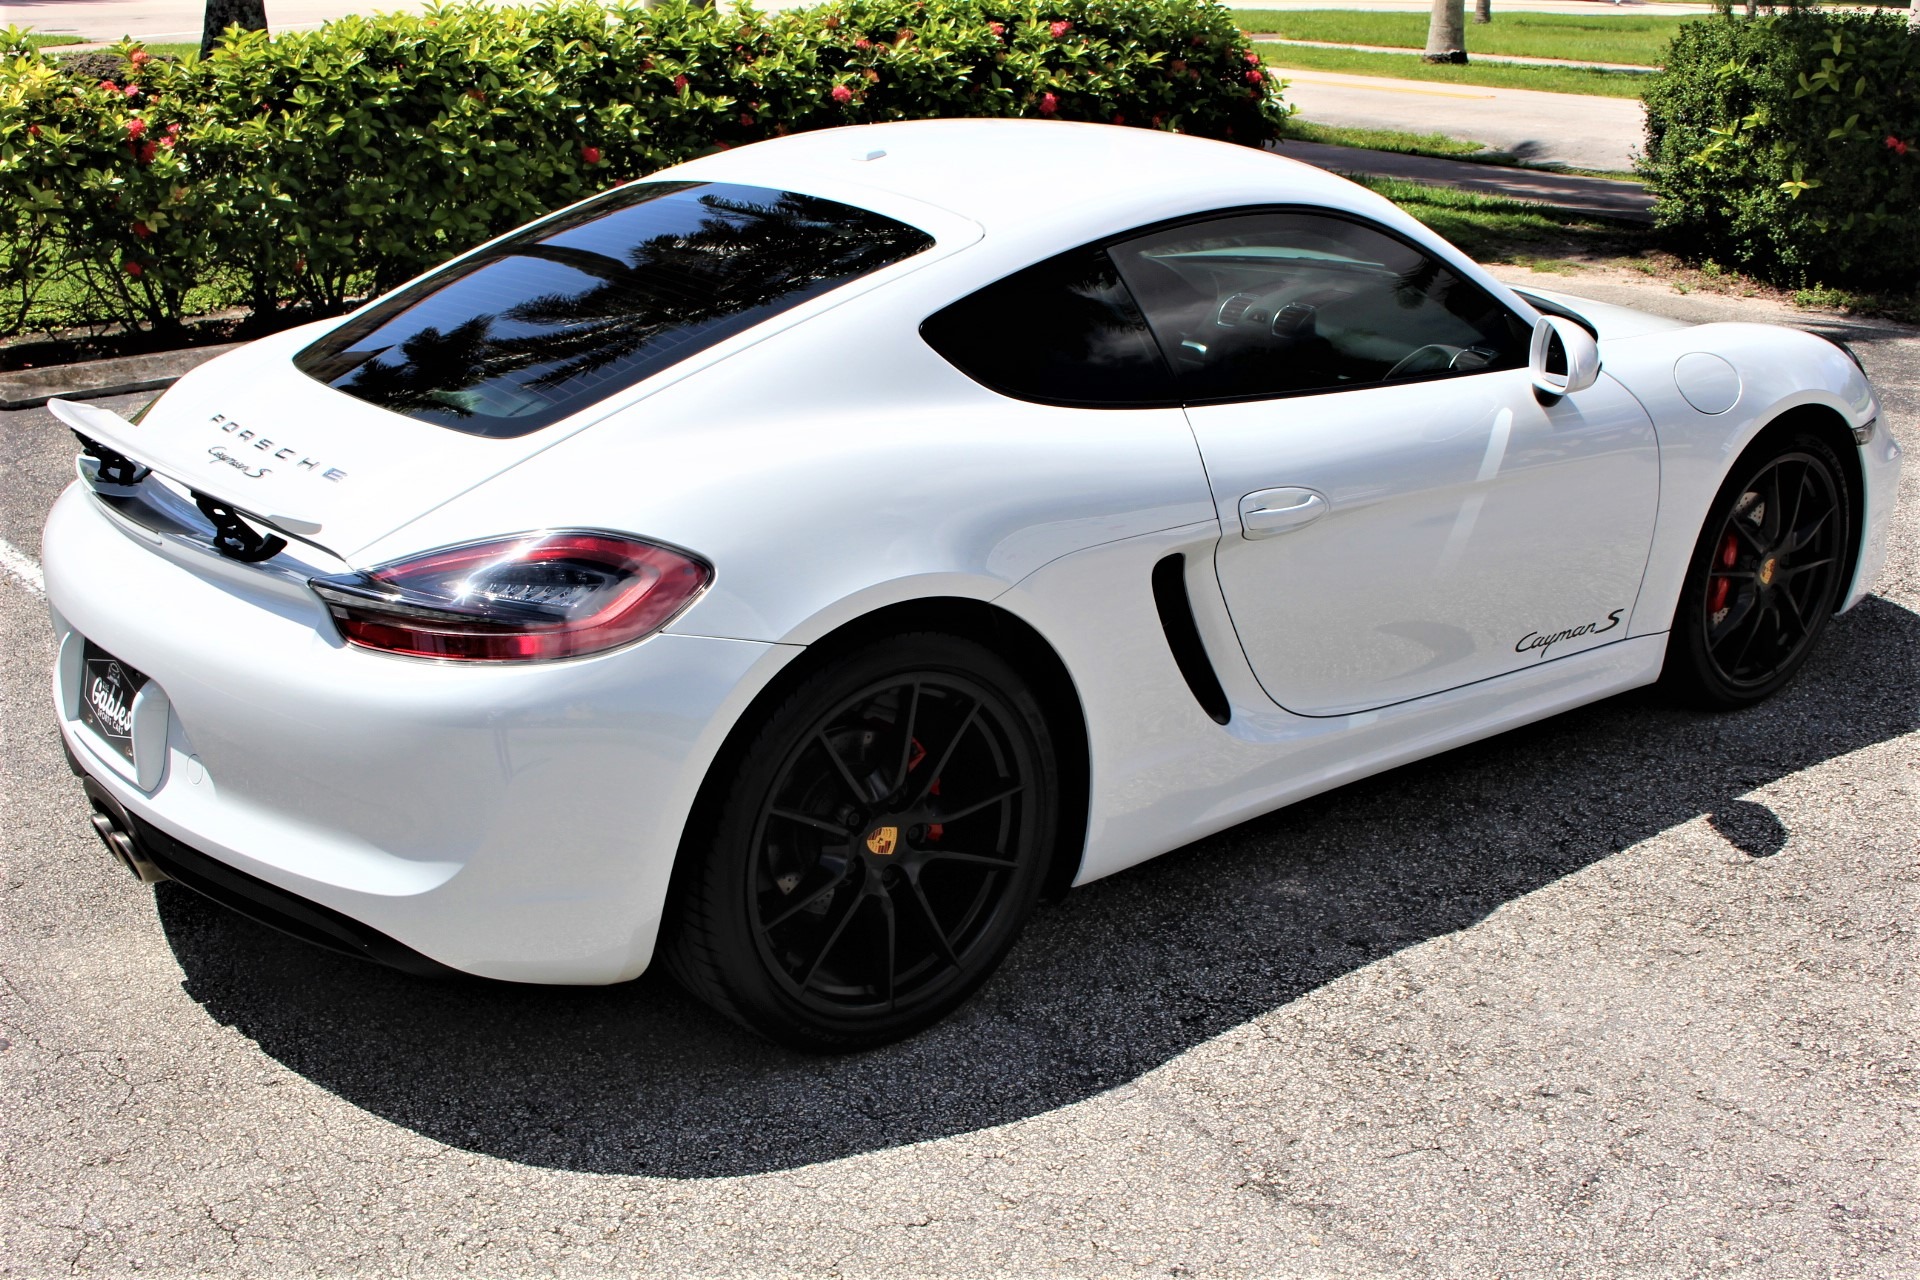 Used 2015 Porsche Cayman S for sale Sold at The Gables Sports Cars in Miami FL 33146 4